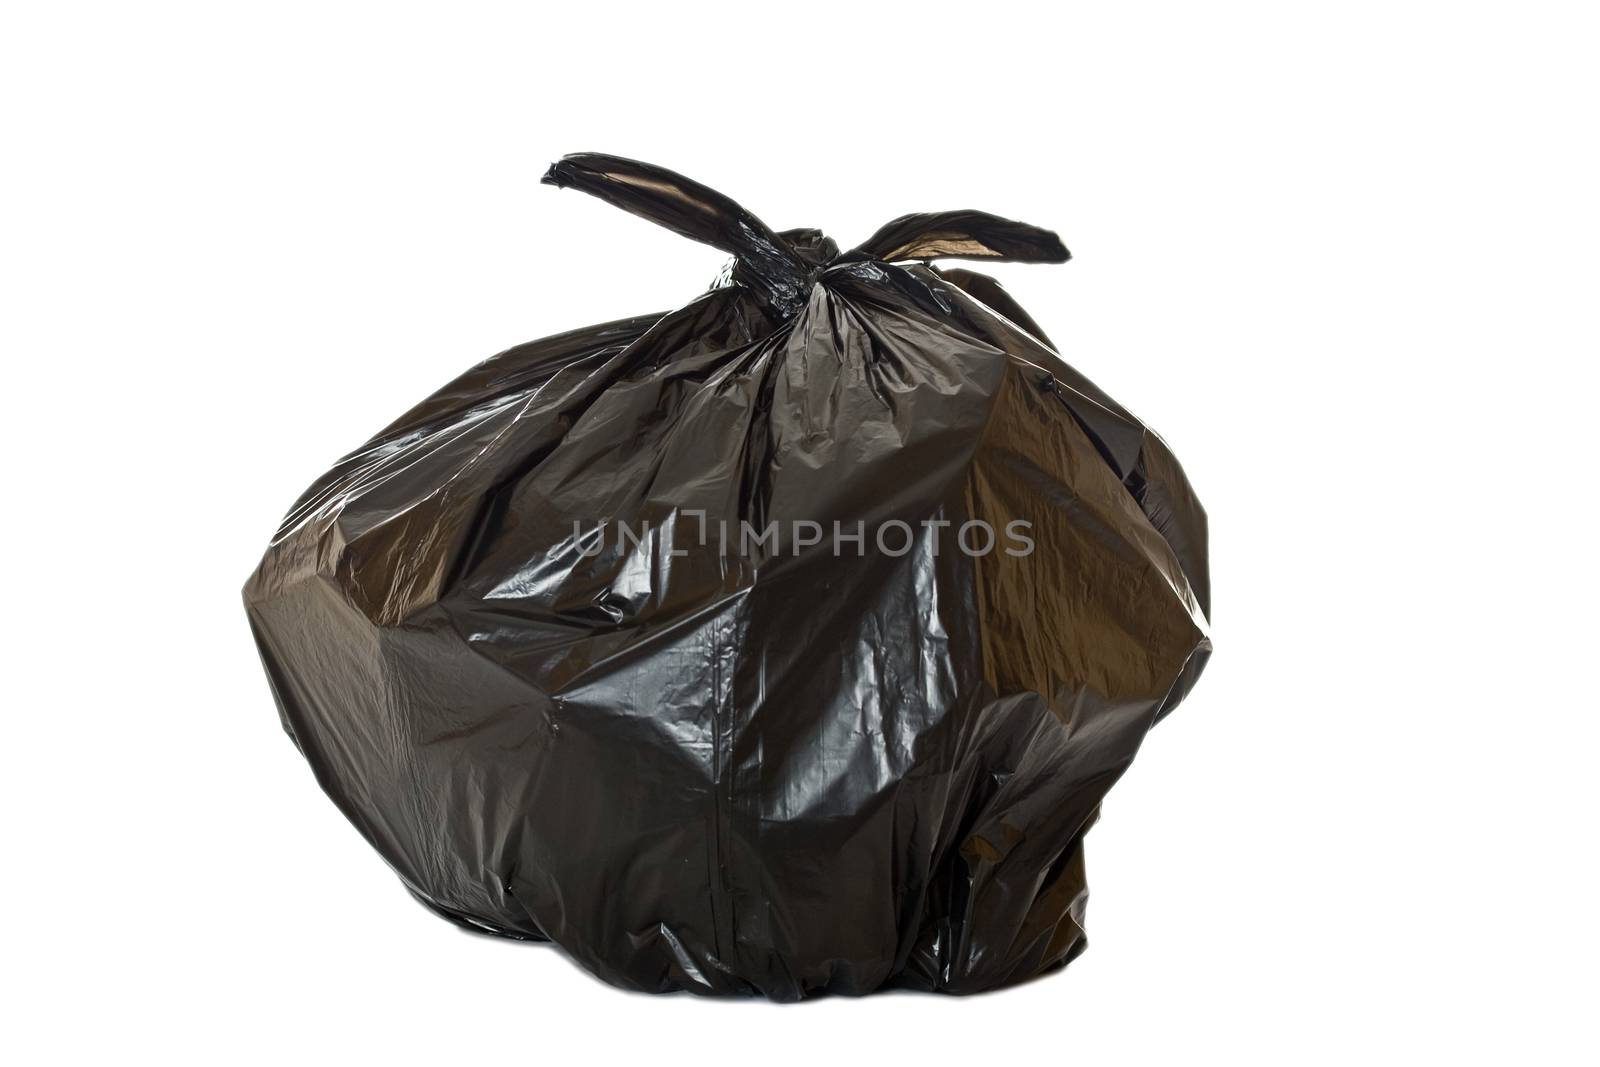 Close up of a garbage bag on white background with clipping path